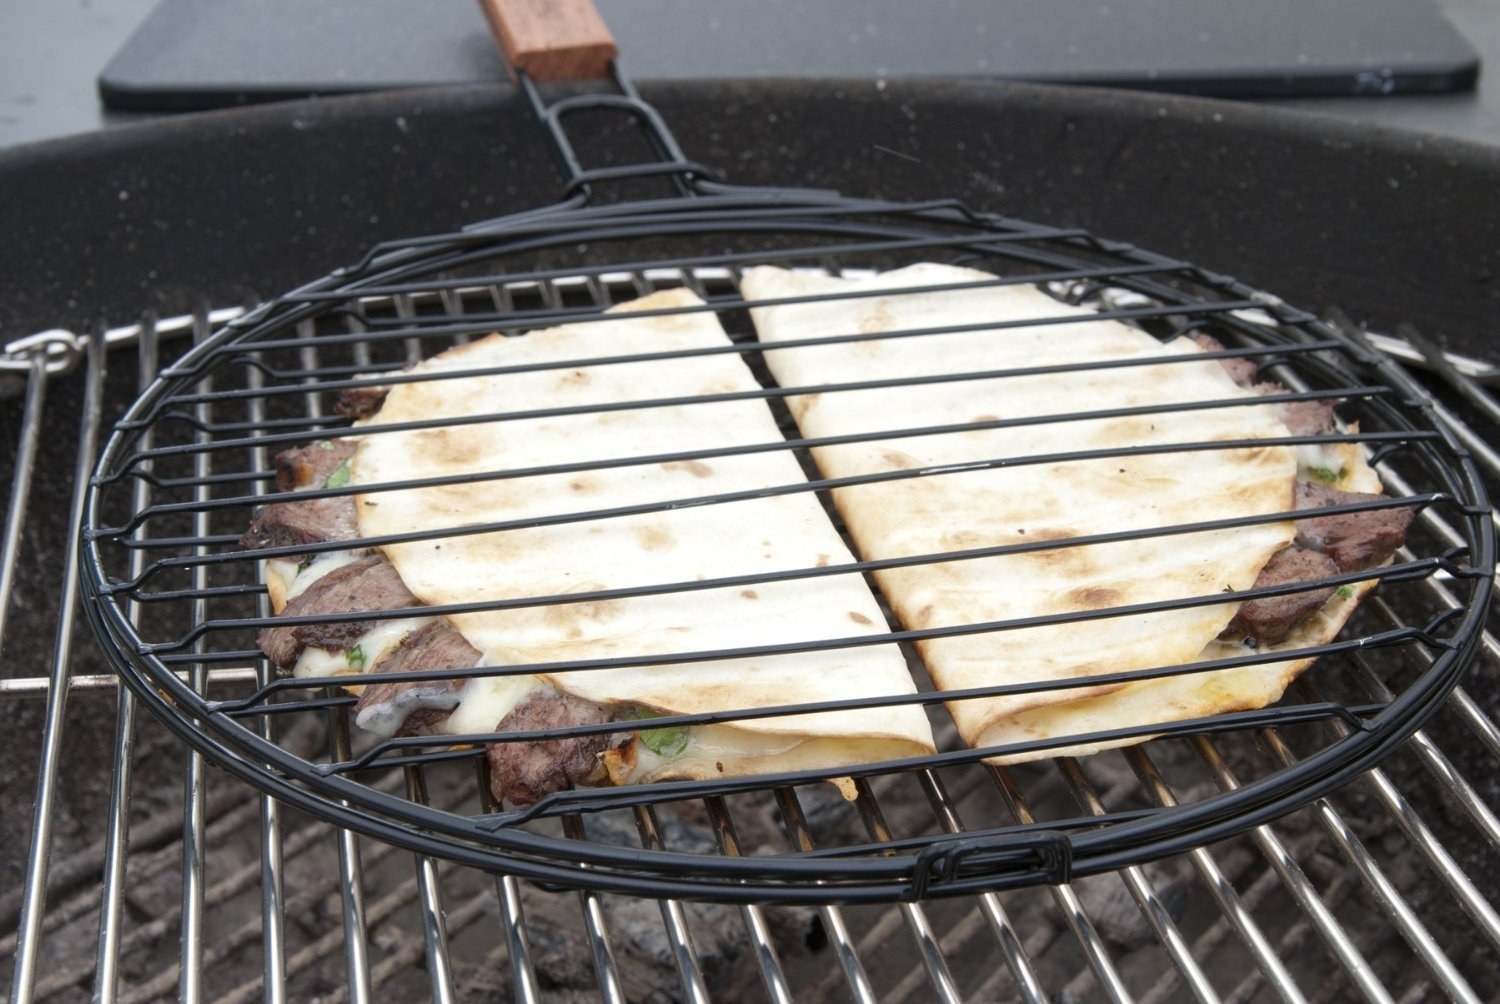 19 Insanely Clever Grilling Gadgets You'll Wish You Knew About Sooner